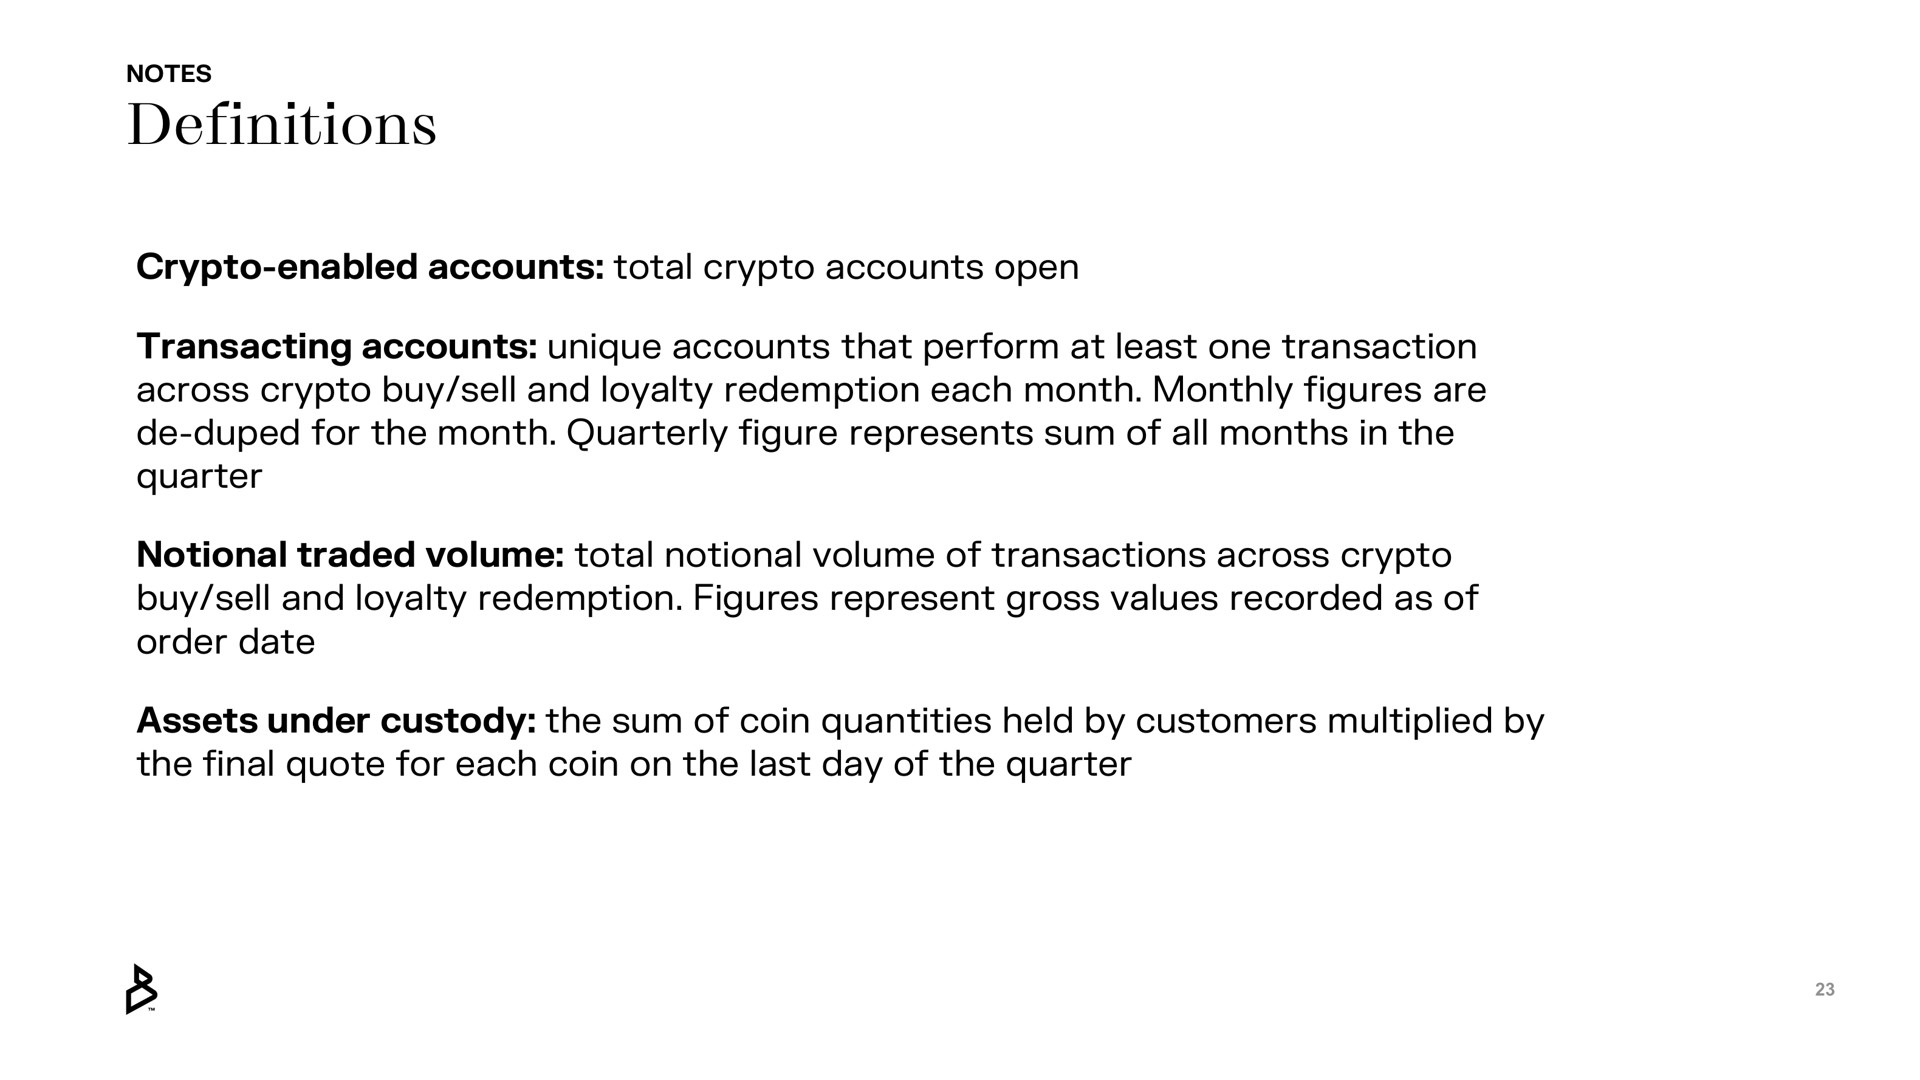 definitions enabled accounts total accounts open transacting accounts unique accounts that perform at least one transaction across buy sell and loyalty redemption each month monthly figures are duped for the month quarterly figure represents sum of all months in the quarter notional traded volume total notional volume of transactions across buy sell and loyalty redemption figures represent gross values recorded as of order date assets under custody the sum of coin quantities held by customers multiplied by the final quote for each coin on the last day of the quarter | Bakkt